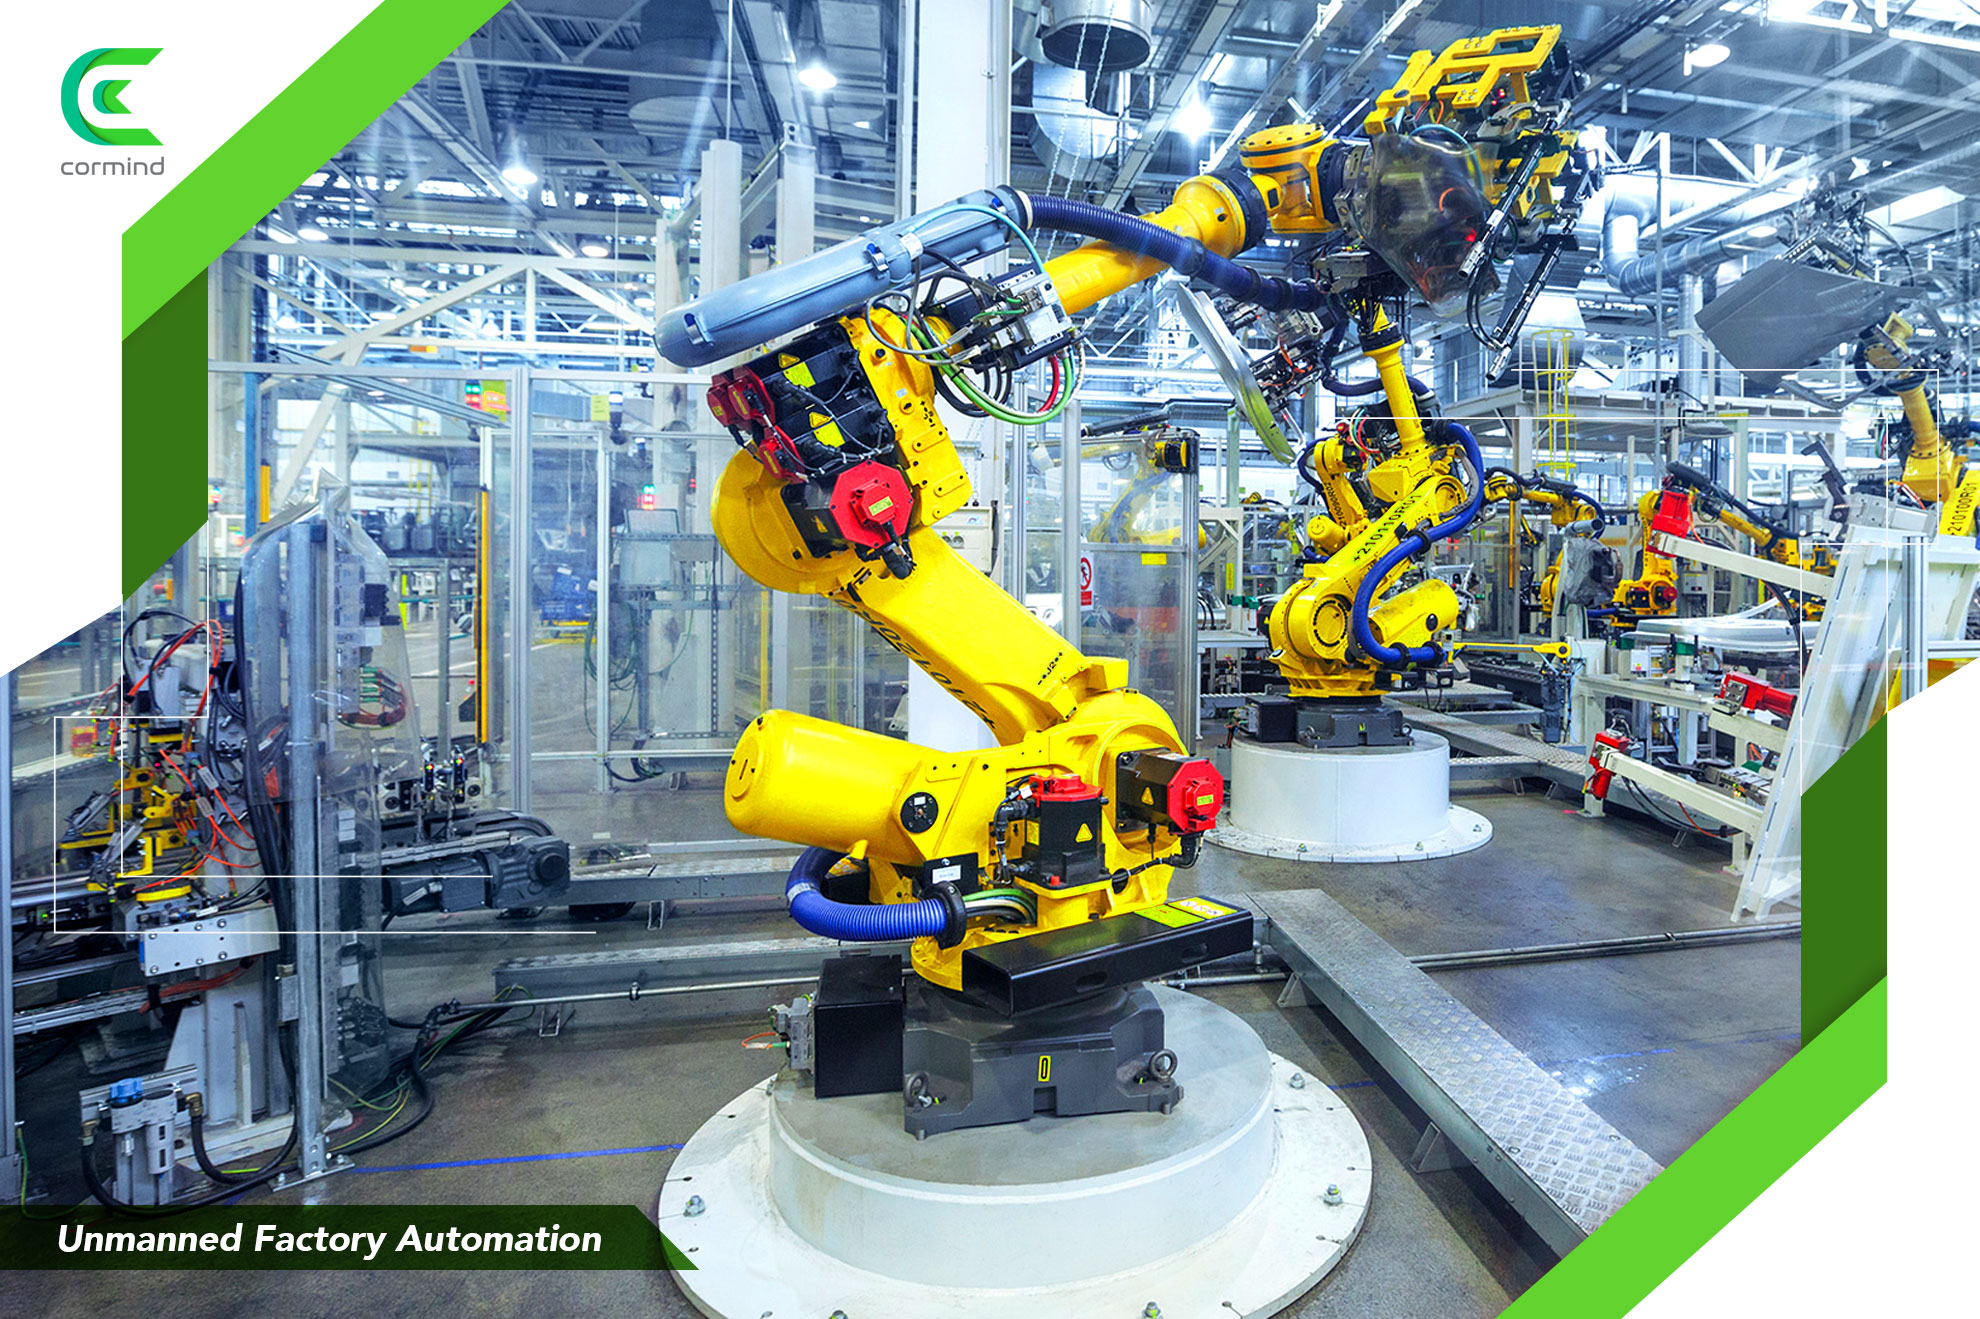 unmanned factory automation, industrial automation, unmanned factory, automated assembly line,